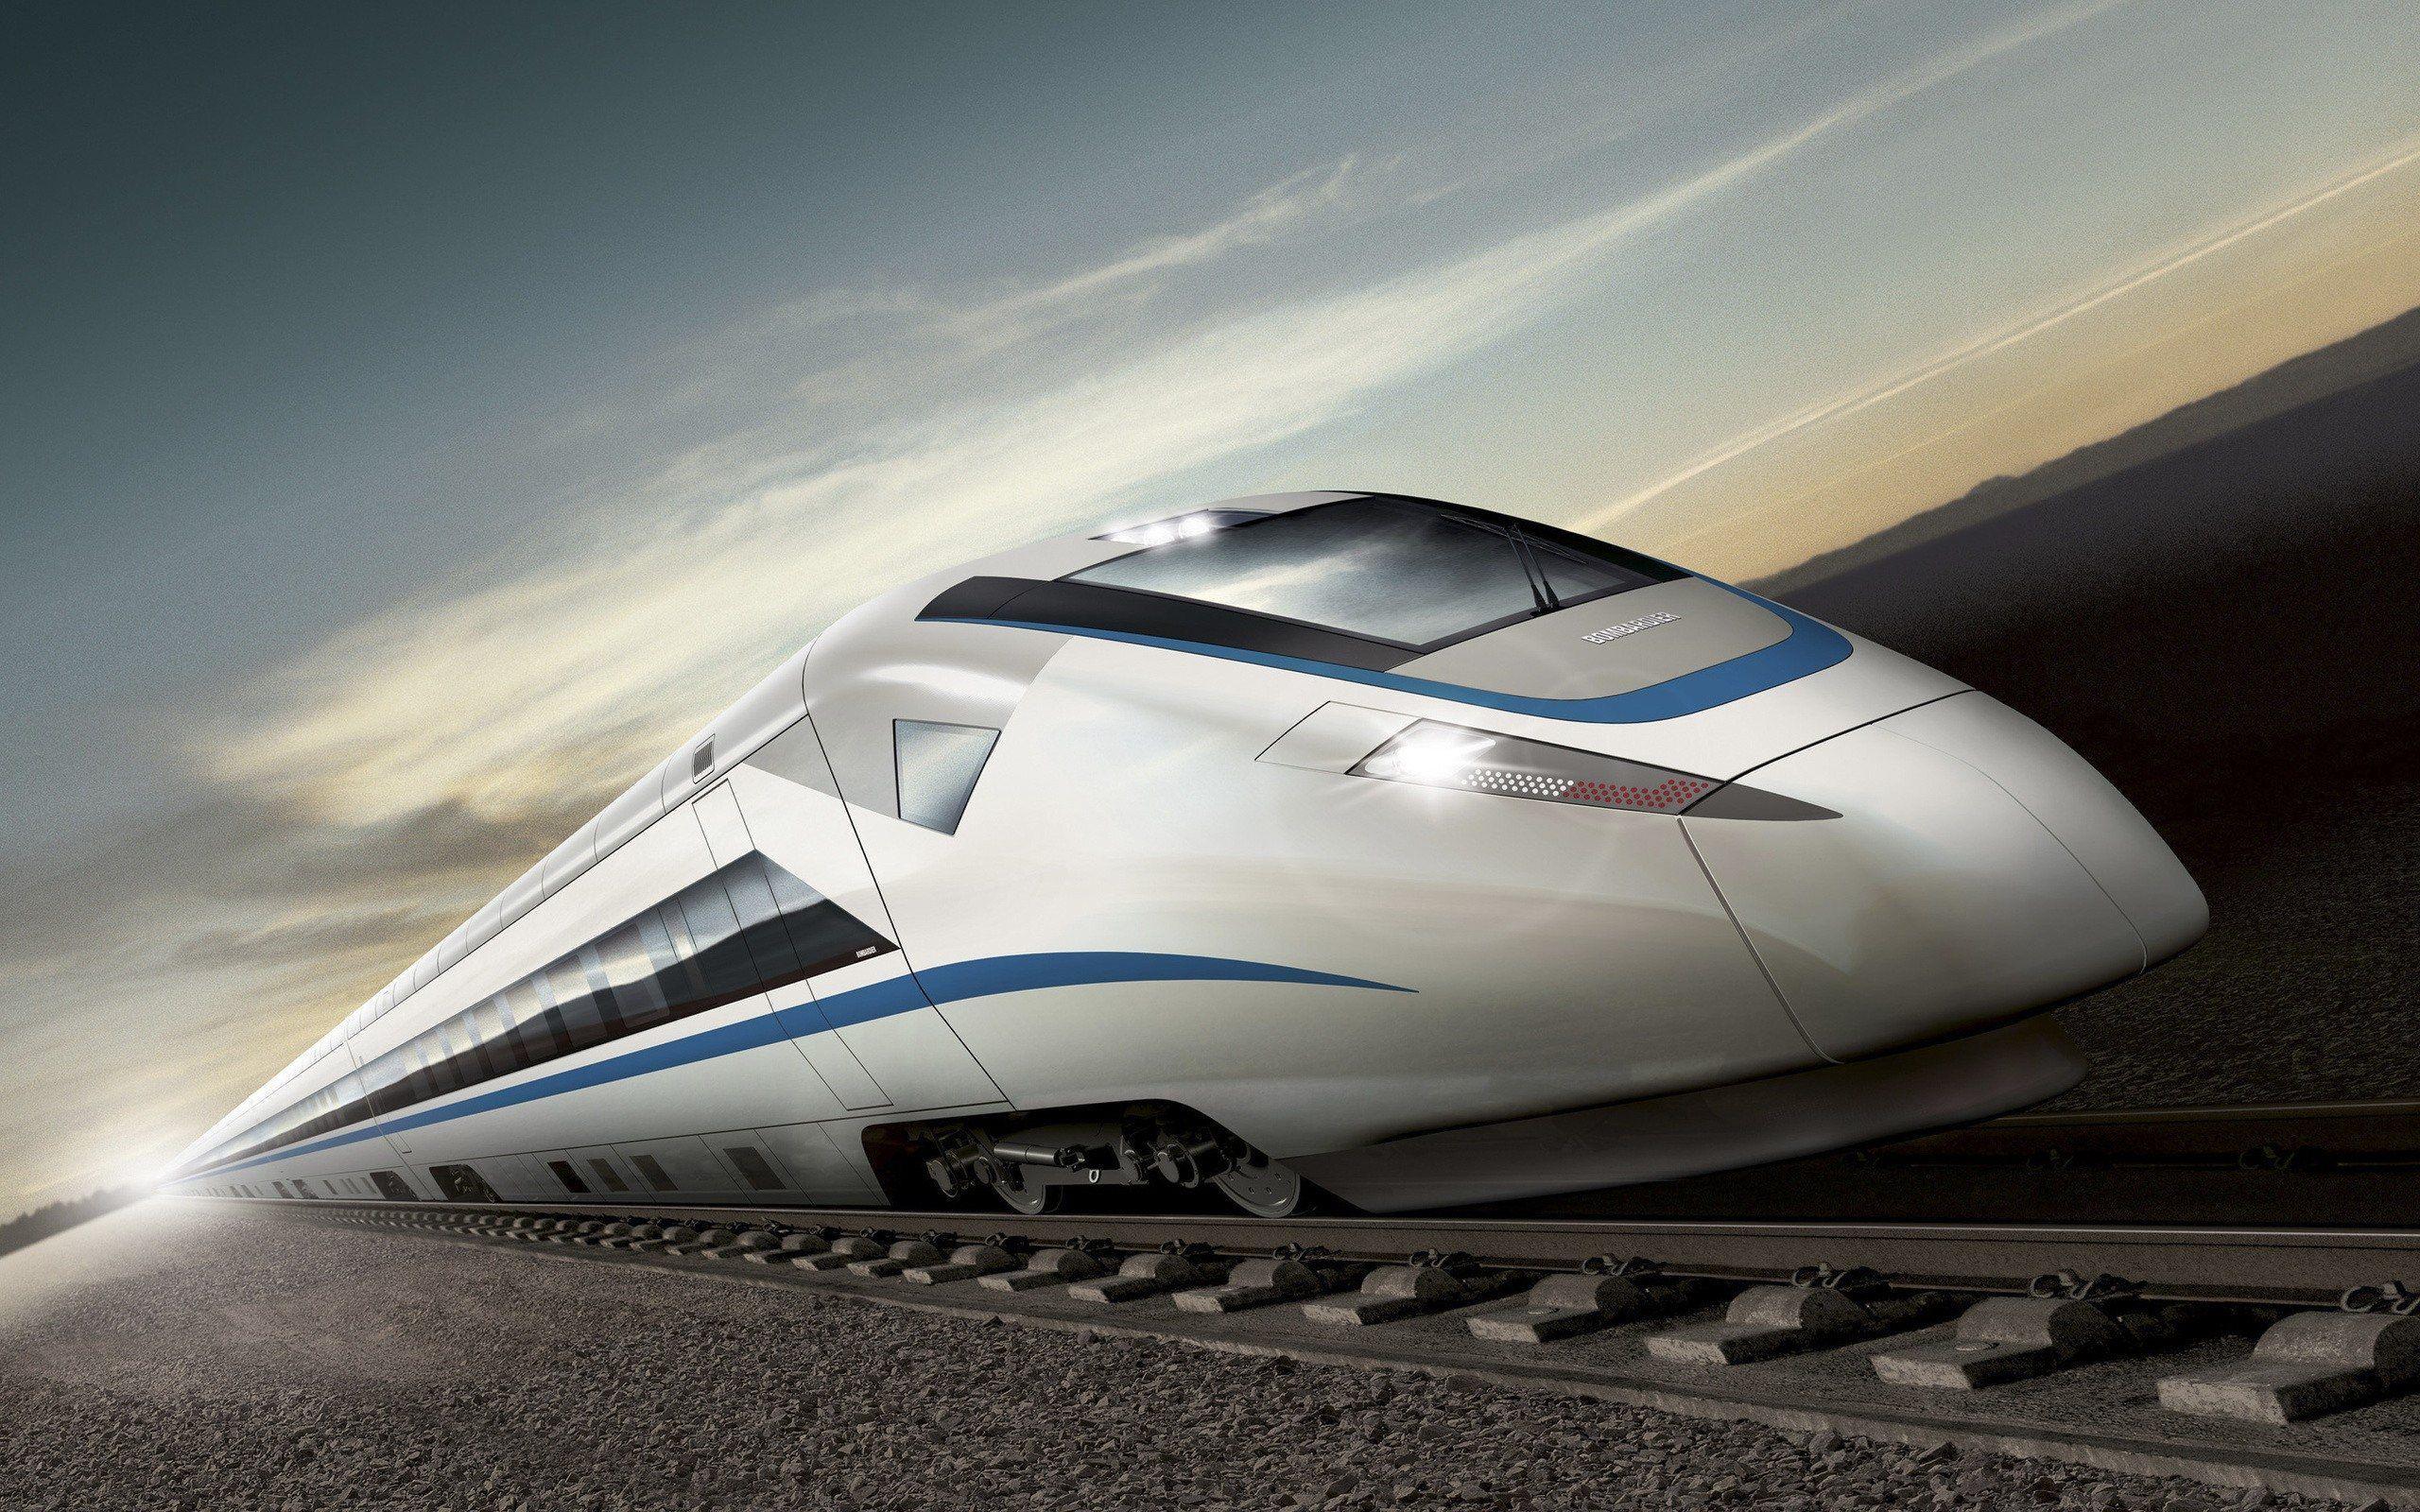 Bullet Train Wallpaper Free Download. Places to go. Train